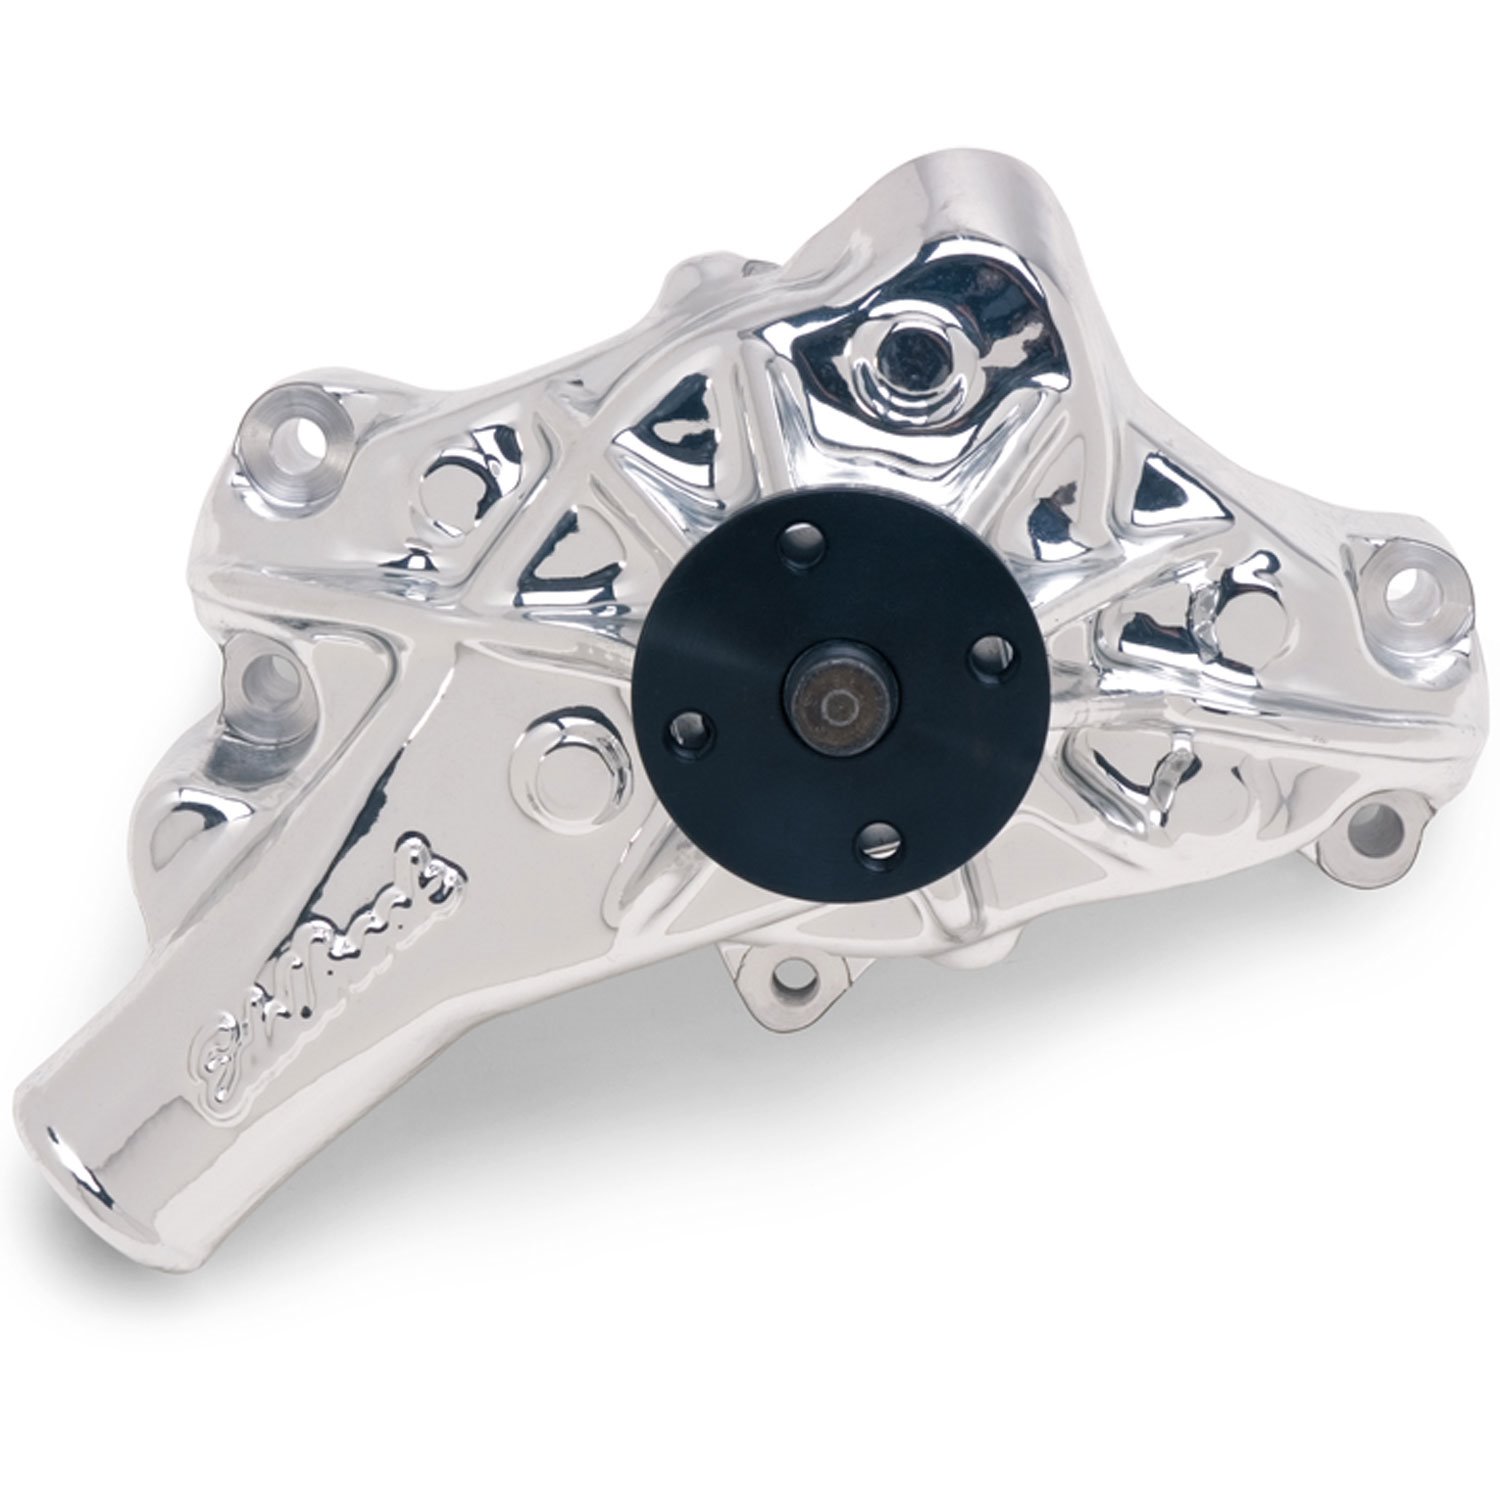 Victor Series EnduraShine Aluminum Water Pump 1987-1995 Small Block Chevy and 90° V6 with Serpentine Drive